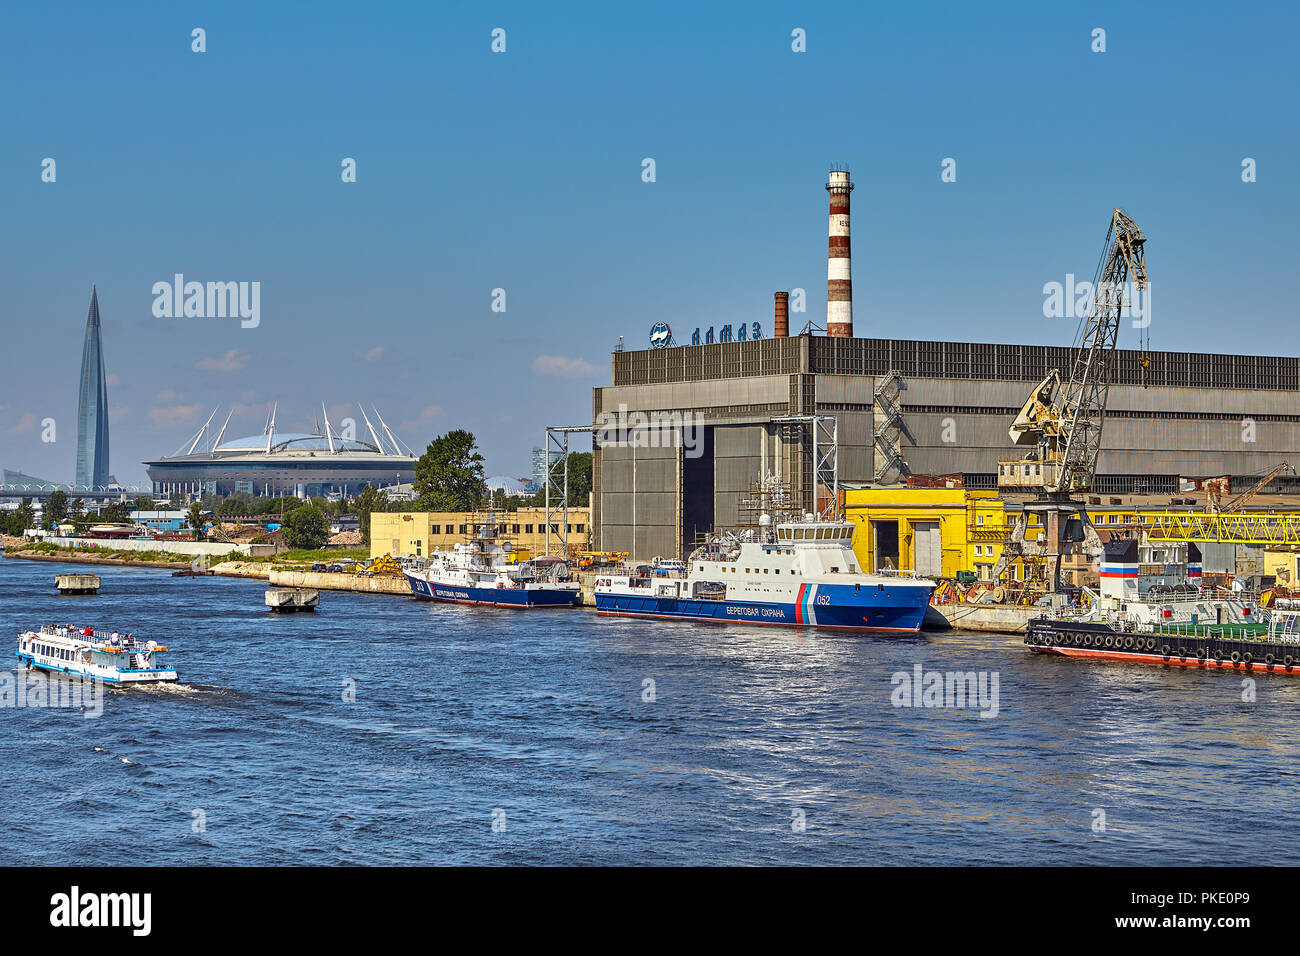 St. Petersburg, Russia - July 19, 2018: Shipbuilding Company Almaz  which is manufacturing the latest models of military technology. Stock Photo